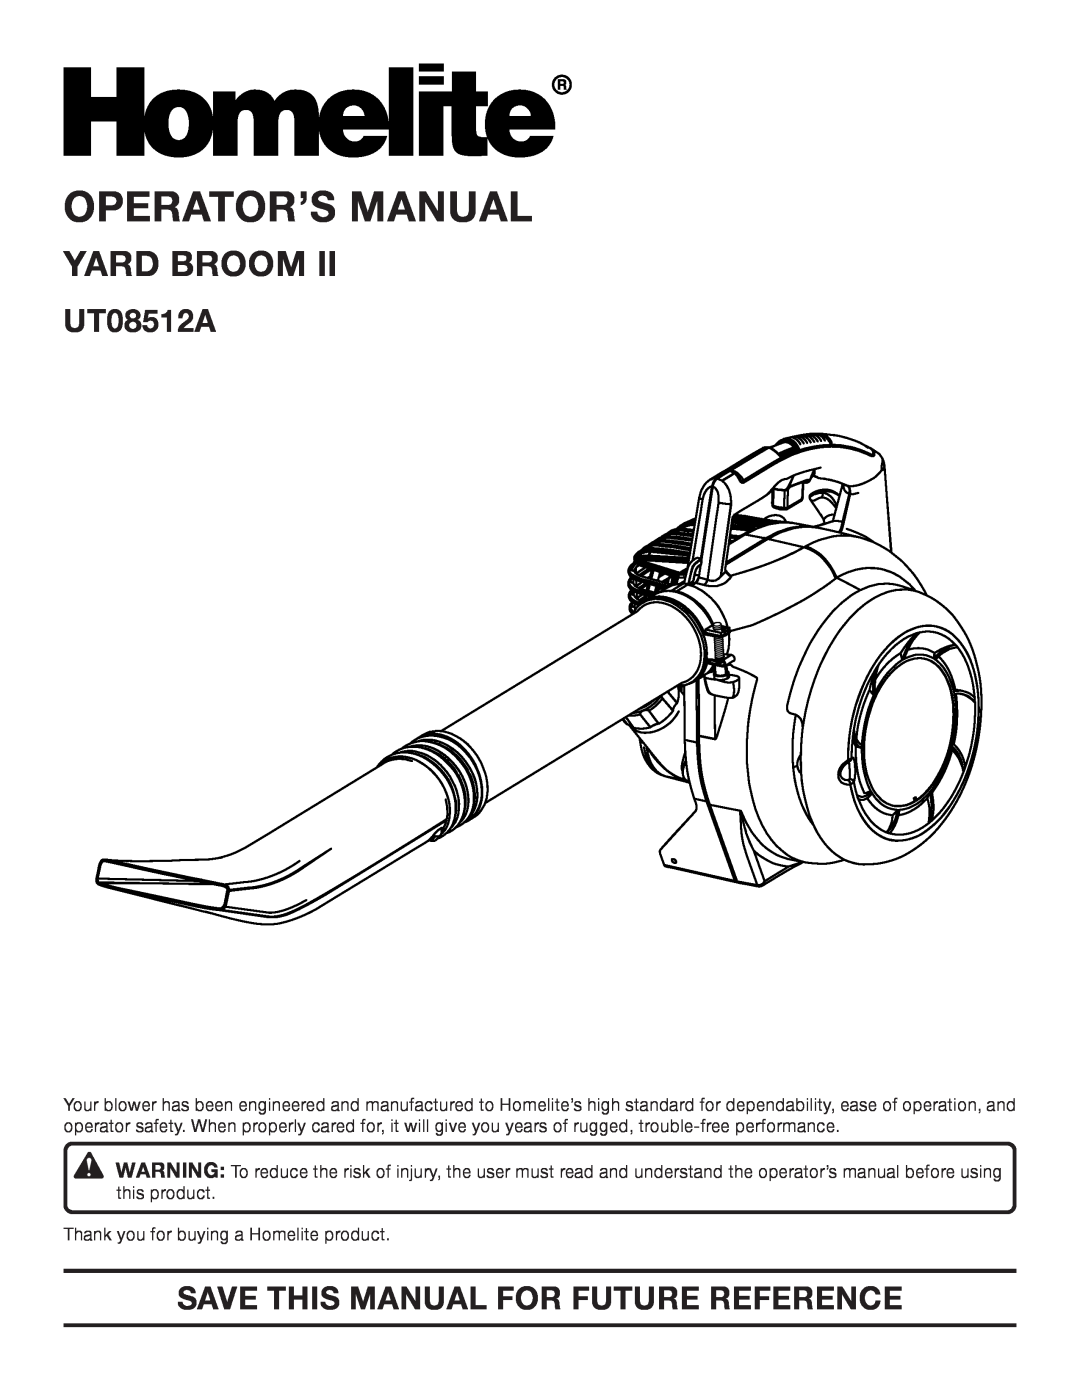 Homelite UT08512A manual Operator’S Manual, Yard Broom, Save This Manual For Future Reference 